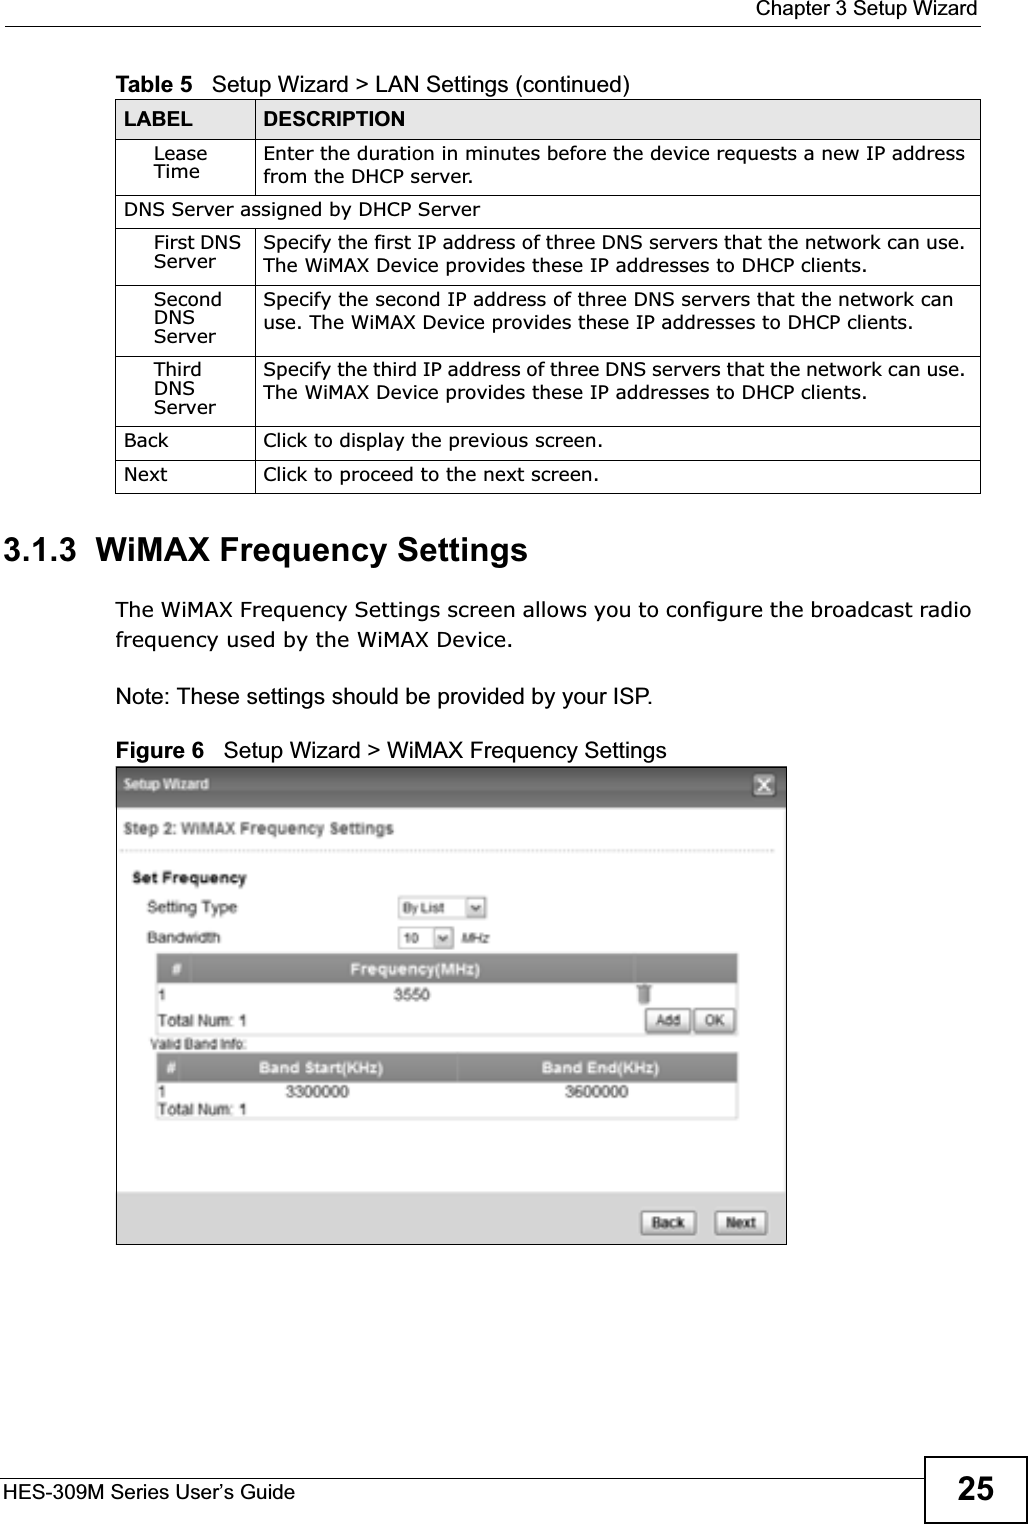  Chapter 3 Setup WizardHES-309M Series User’s Guide 253.1.3  WiMAX Frequency SettingsThe WiMAX Frequency Settings screen allows you to configure the broadcast radio frequency used by the WiMAX Device.Note: These settings should be provided by your ISP.Figure 6   Setup Wizard &gt; WiMAX Frequency SettingsLease Time Enter the duration in minutes before the device requests a new IP address from the DHCP server.DNS Server assigned by DHCP ServerFirst DNS Server Specify the first IP address of three DNS servers that the network can use. The WiMAX Device provides these IP addresses to DHCP clients.SecondDNS ServerSpecify the second IP address of three DNS servers that the network can use. The WiMAX Device provides these IP addresses to DHCP clients.ThirdDNS ServerSpecify the third IP address of three DNS servers that the network can use. The WiMAX Device provides these IP addresses to DHCP clients.Back Click to display the previous screen.Next Click to proceed to the next screen. Table 5   Setup Wizard &gt; LAN Settings (continued)LABEL DESCRIPTION